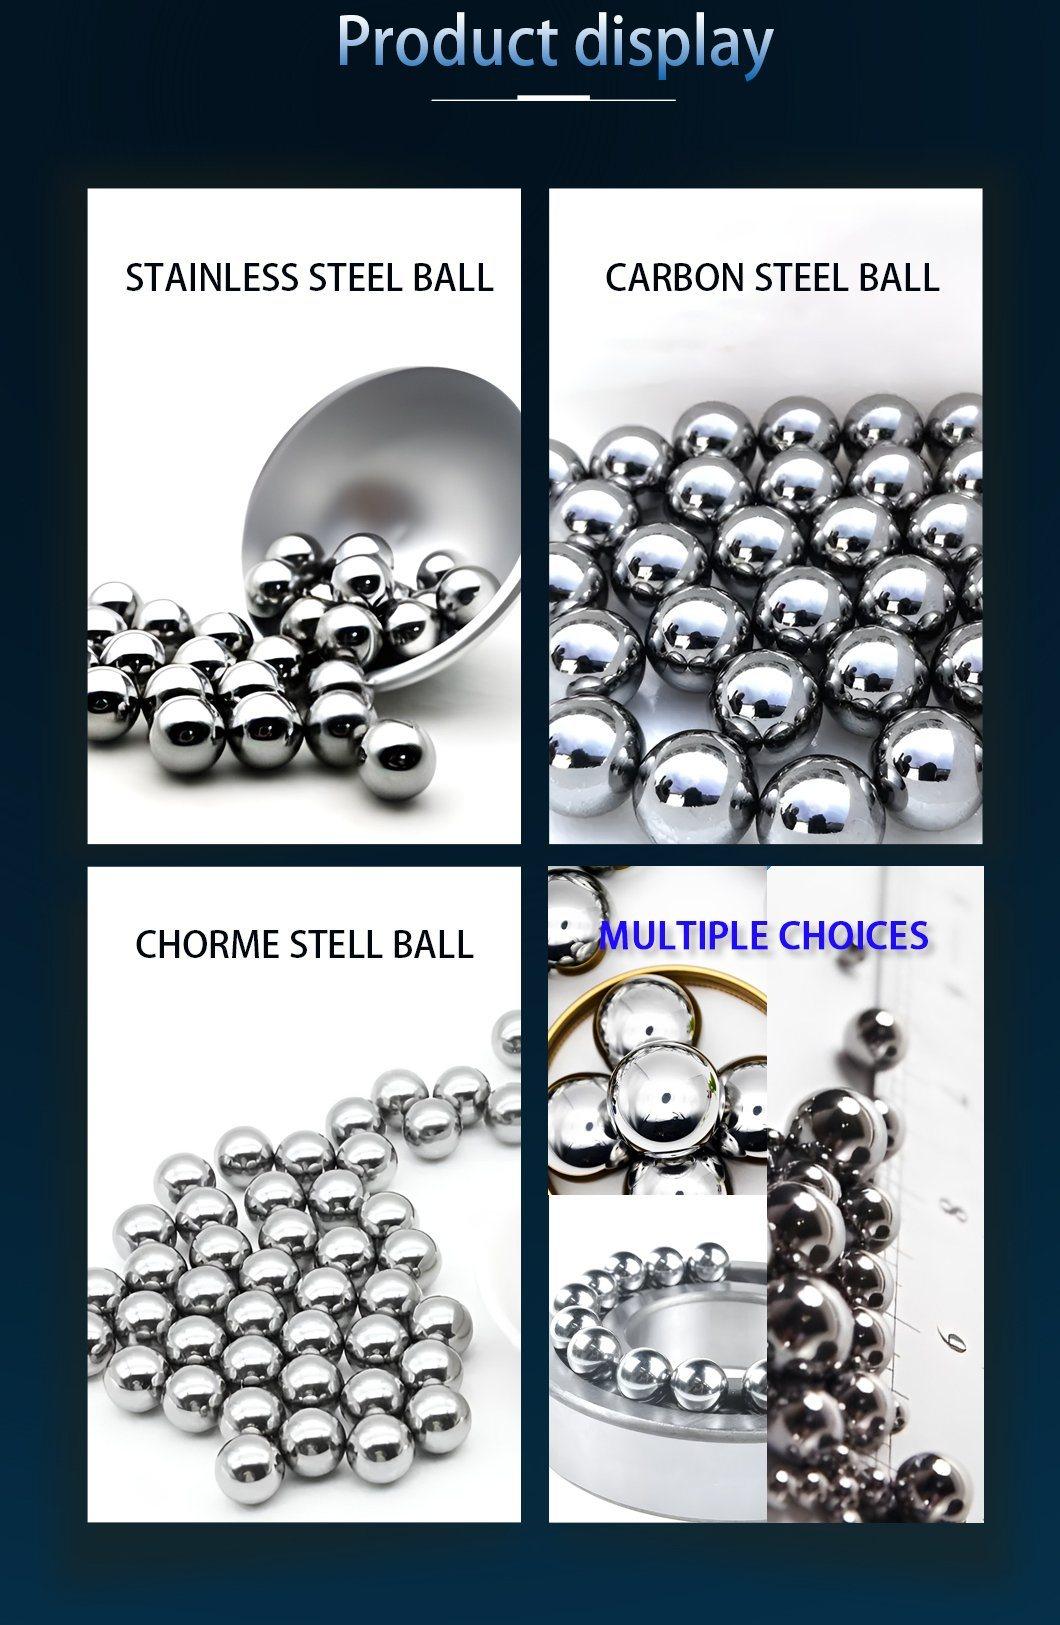 Stainless Steel Ball 1/64", 1/32", 3/64", 1/16", 5/64", 3/32", 7/64" Inch for Bearing Valve Switch Medical Equipment Chemical Aviation Aerospace Hardware